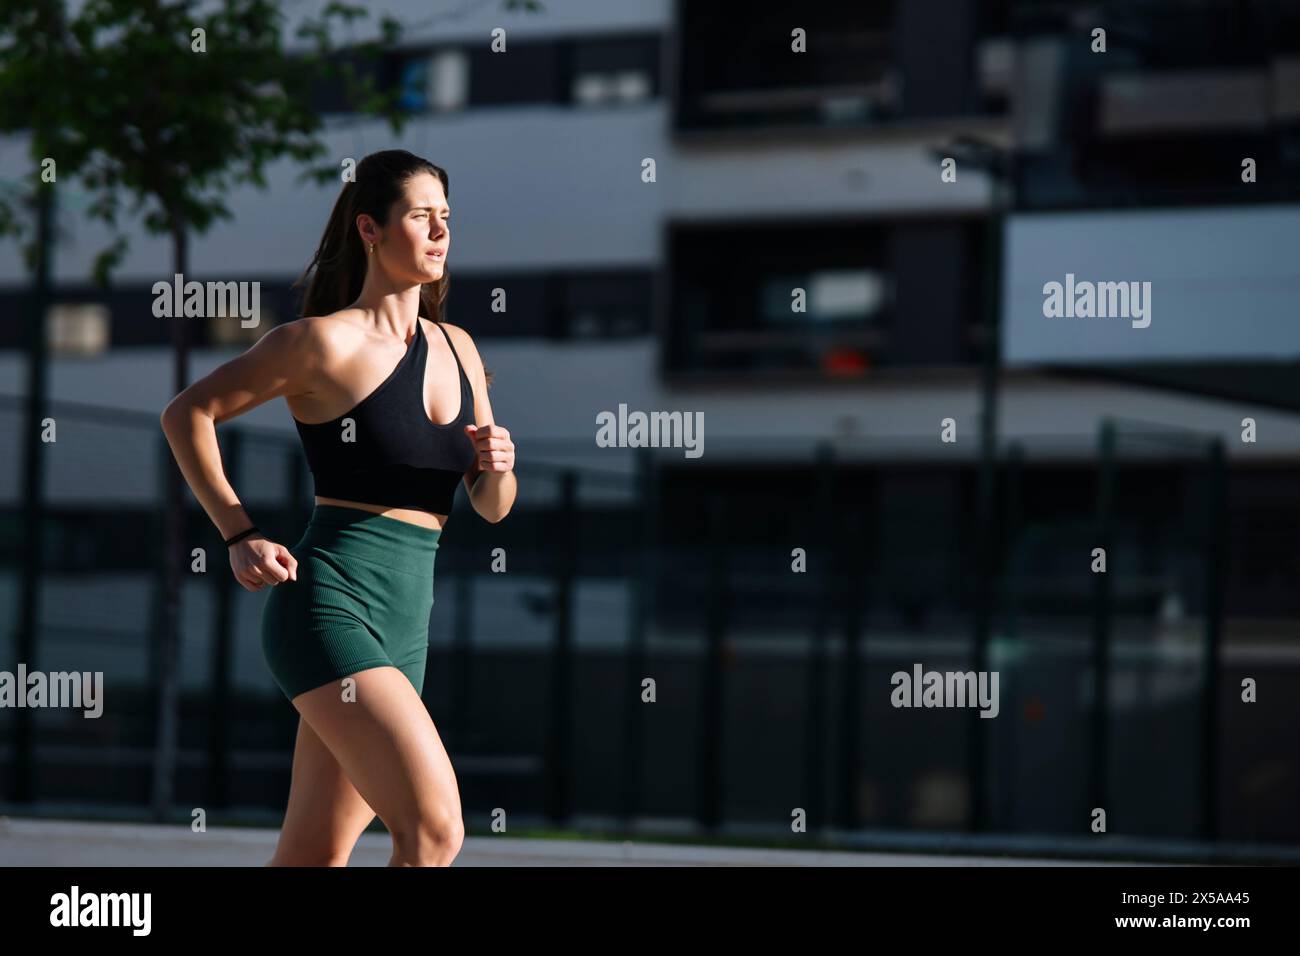 An athletic woman in sports attire jogs against a backdrop of modern buildings, showcasing a healthy lifestyle in an urban environment Stock Photo